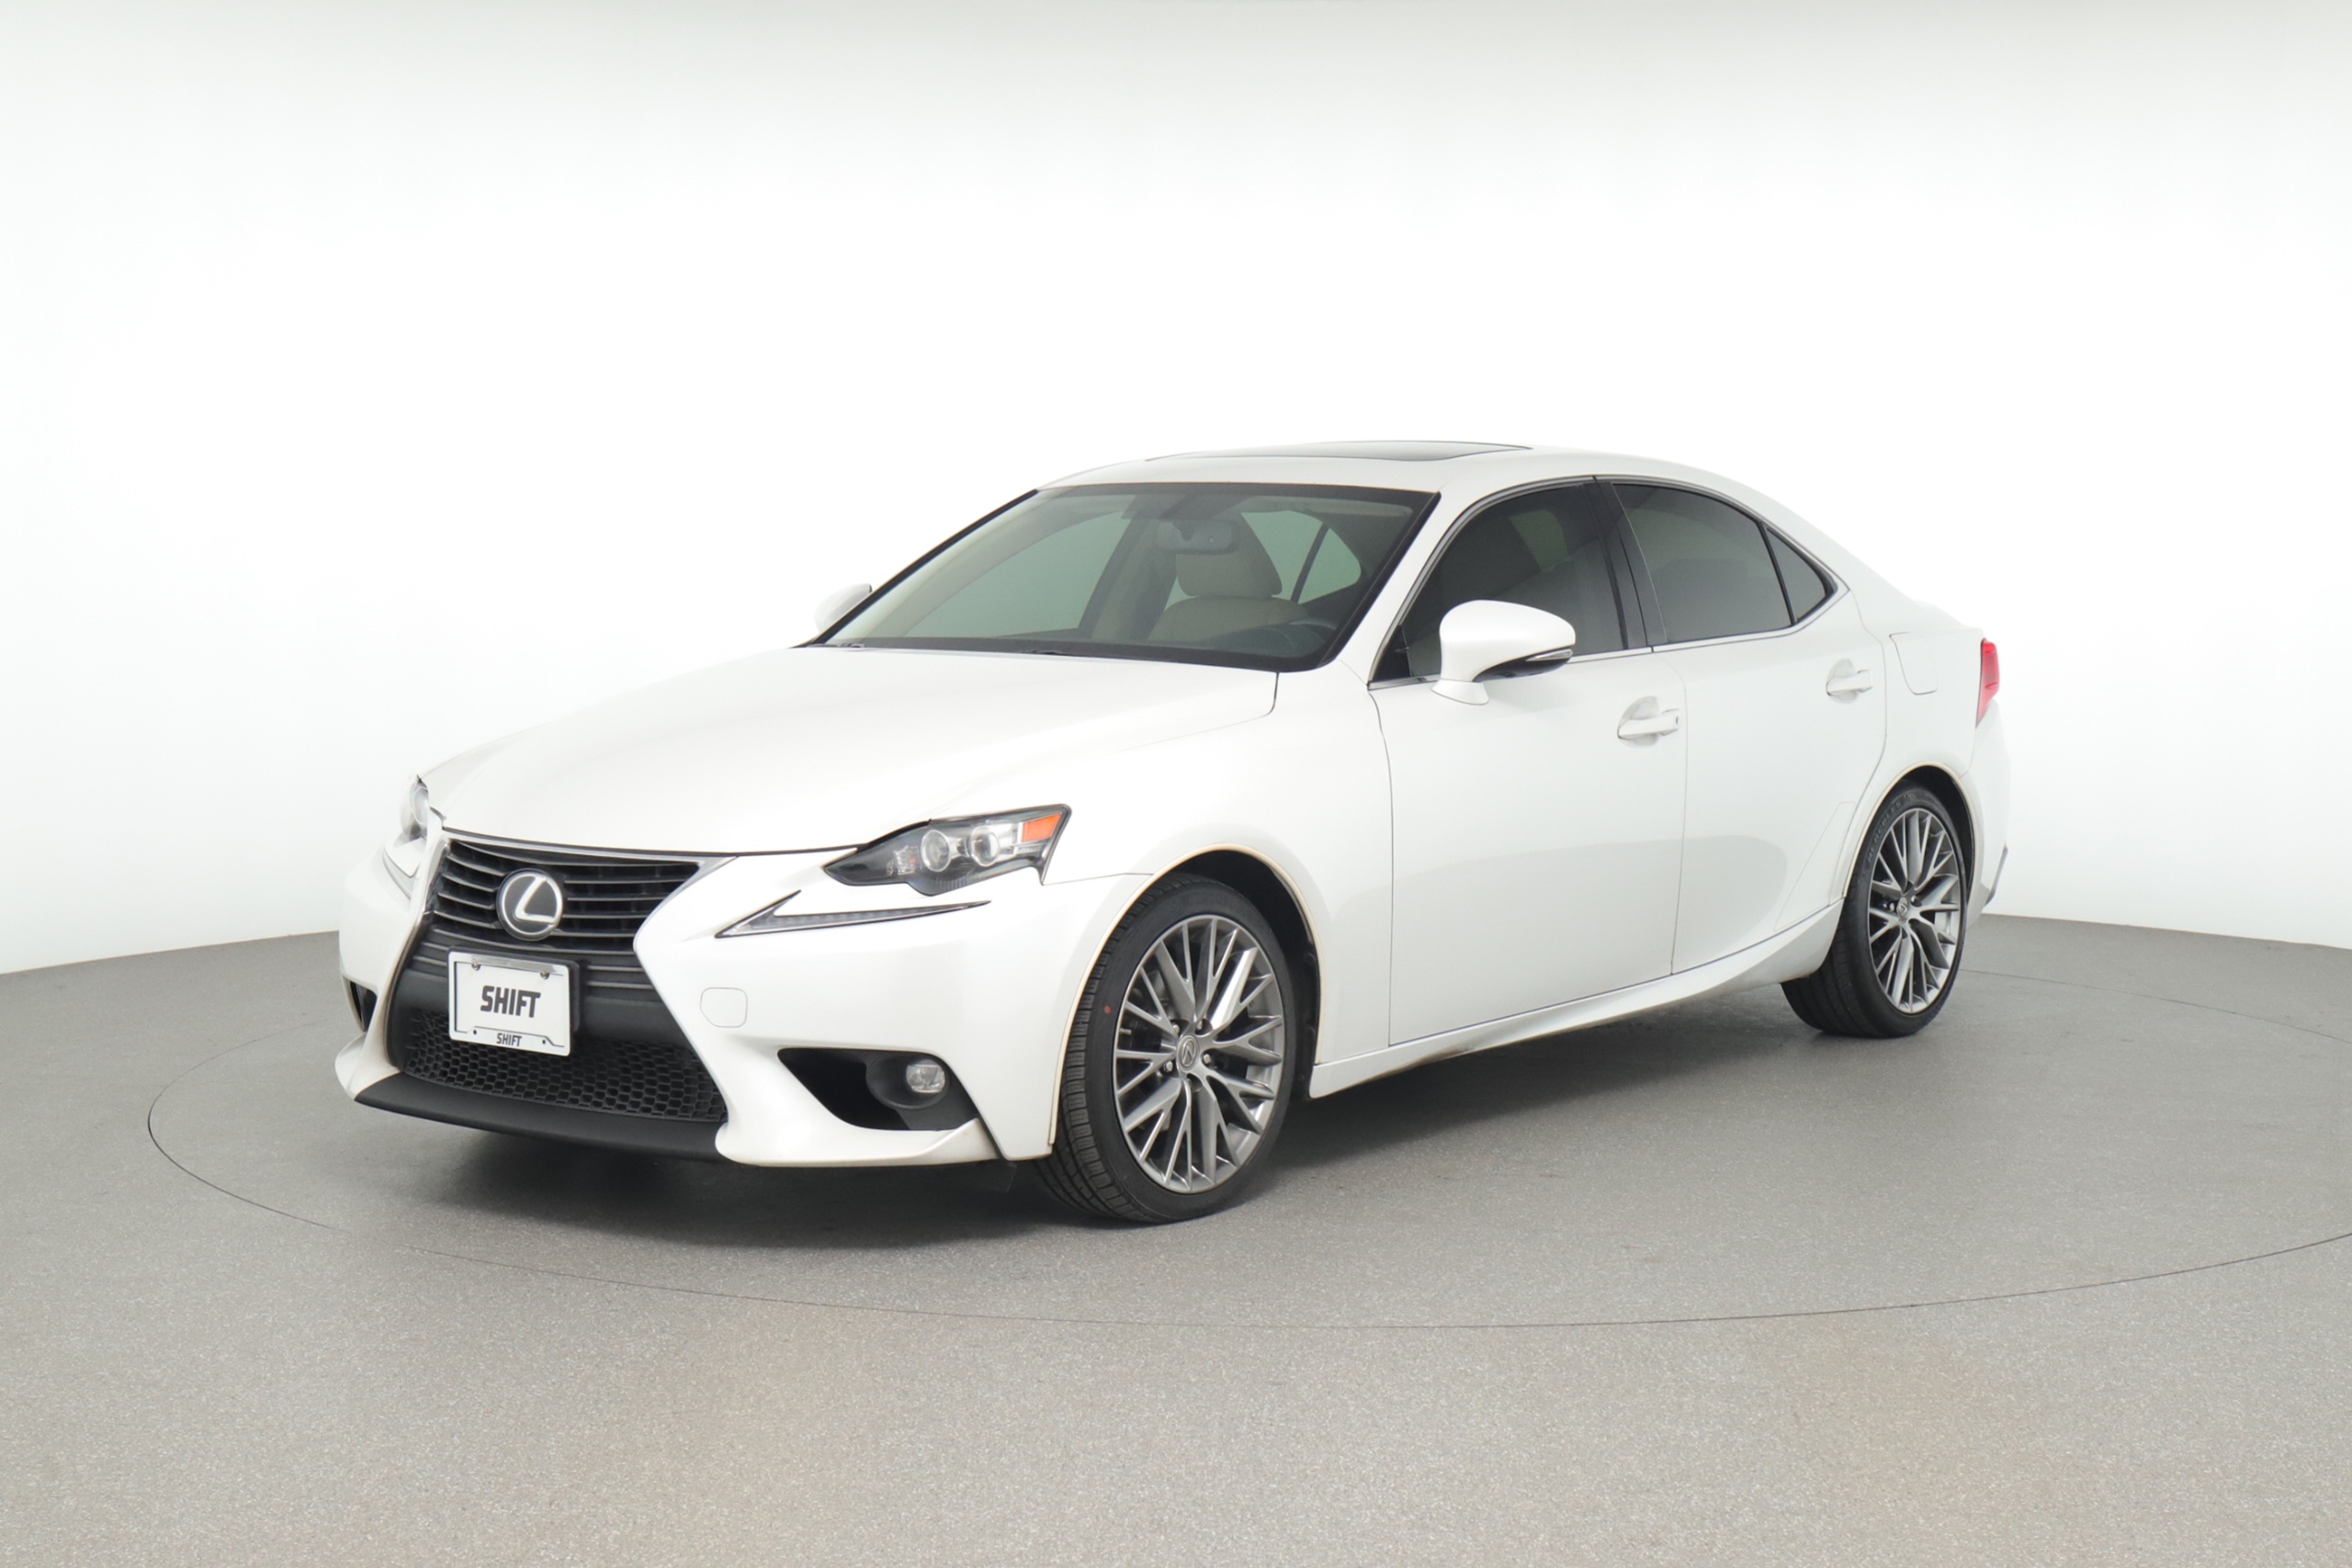 Lexus IS 250 Review: Pricing, Specs & More | Shift